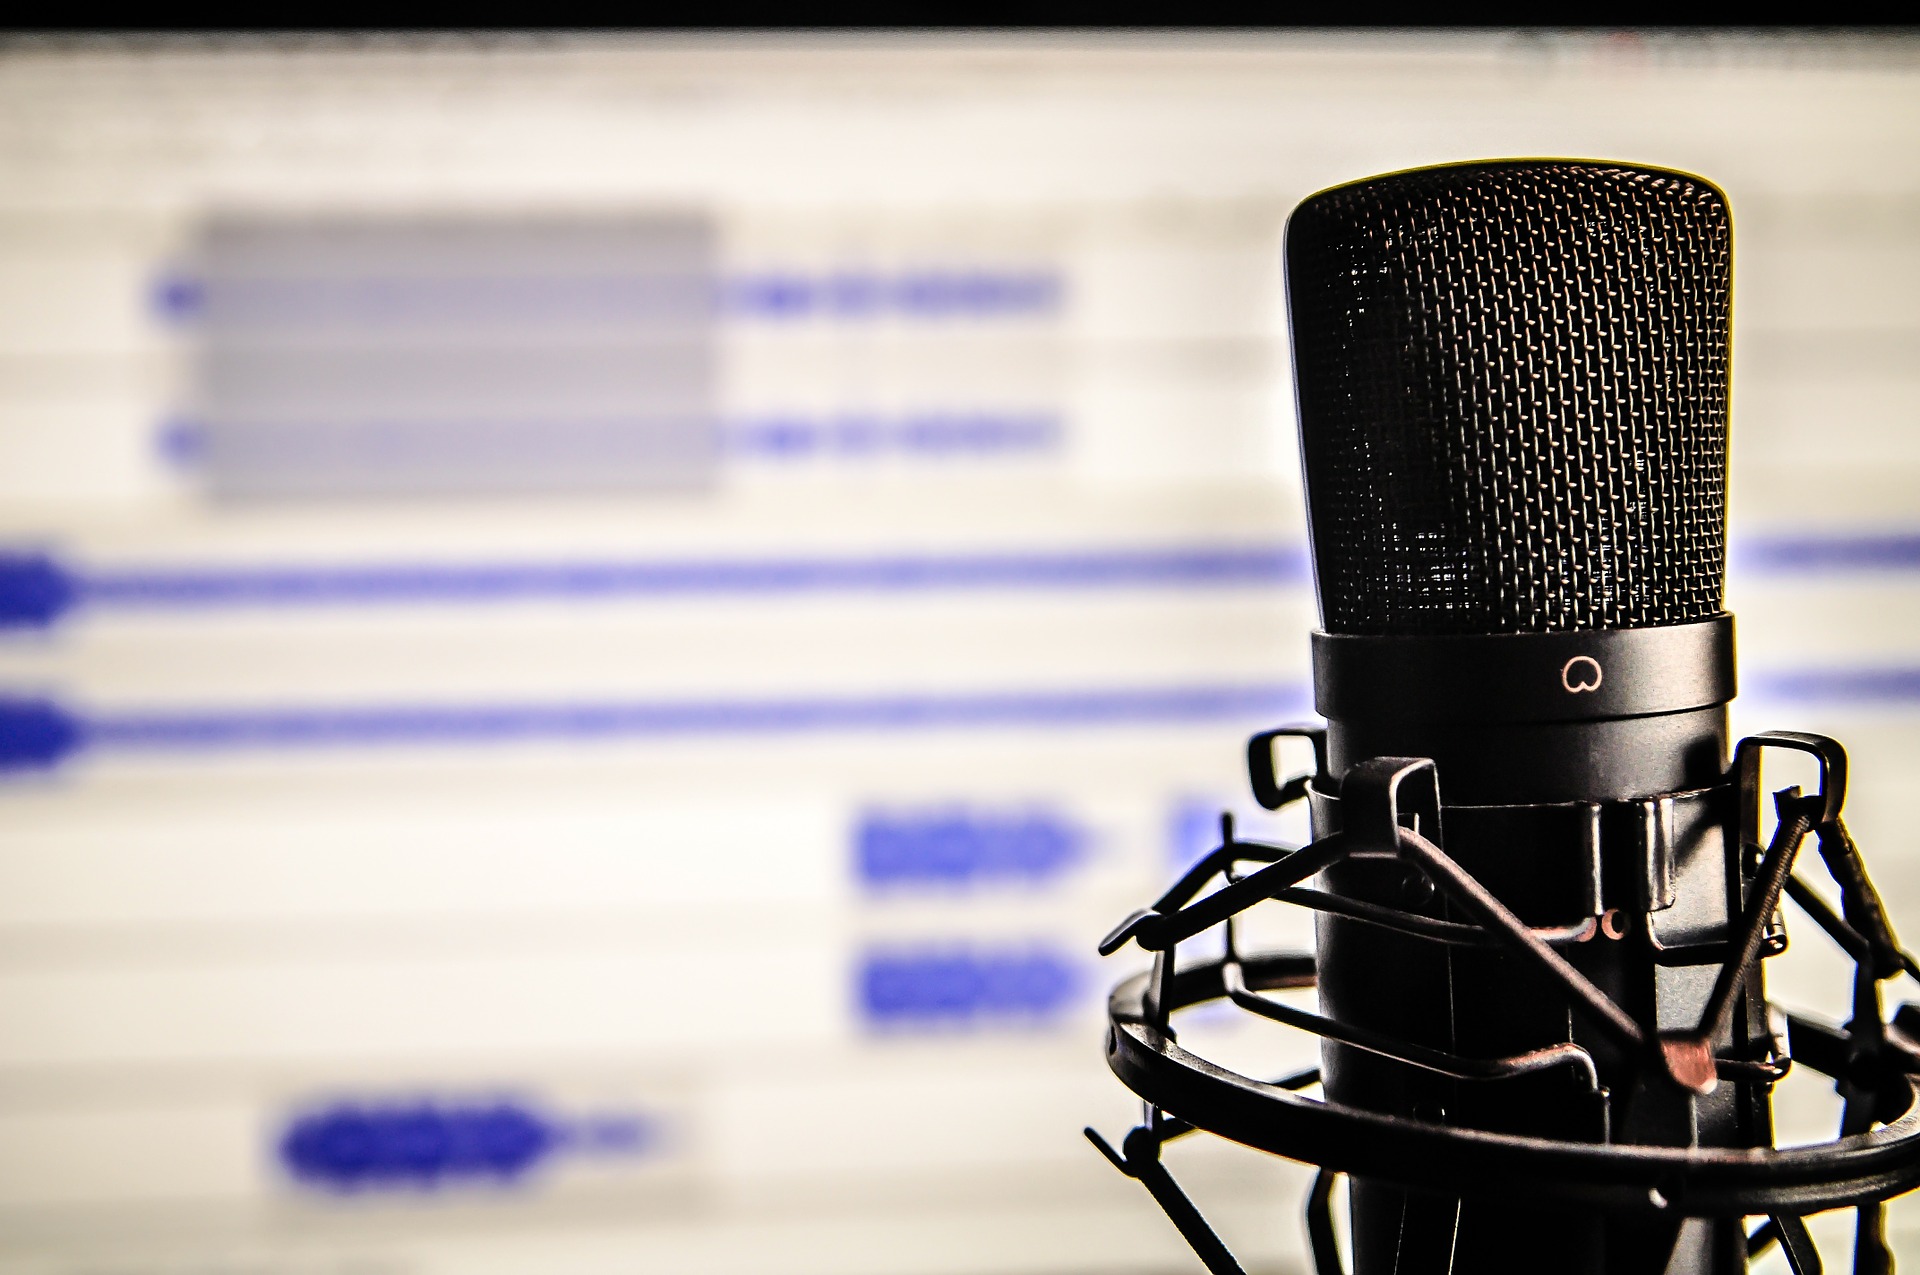 Top 5 Podcasting Microphones 